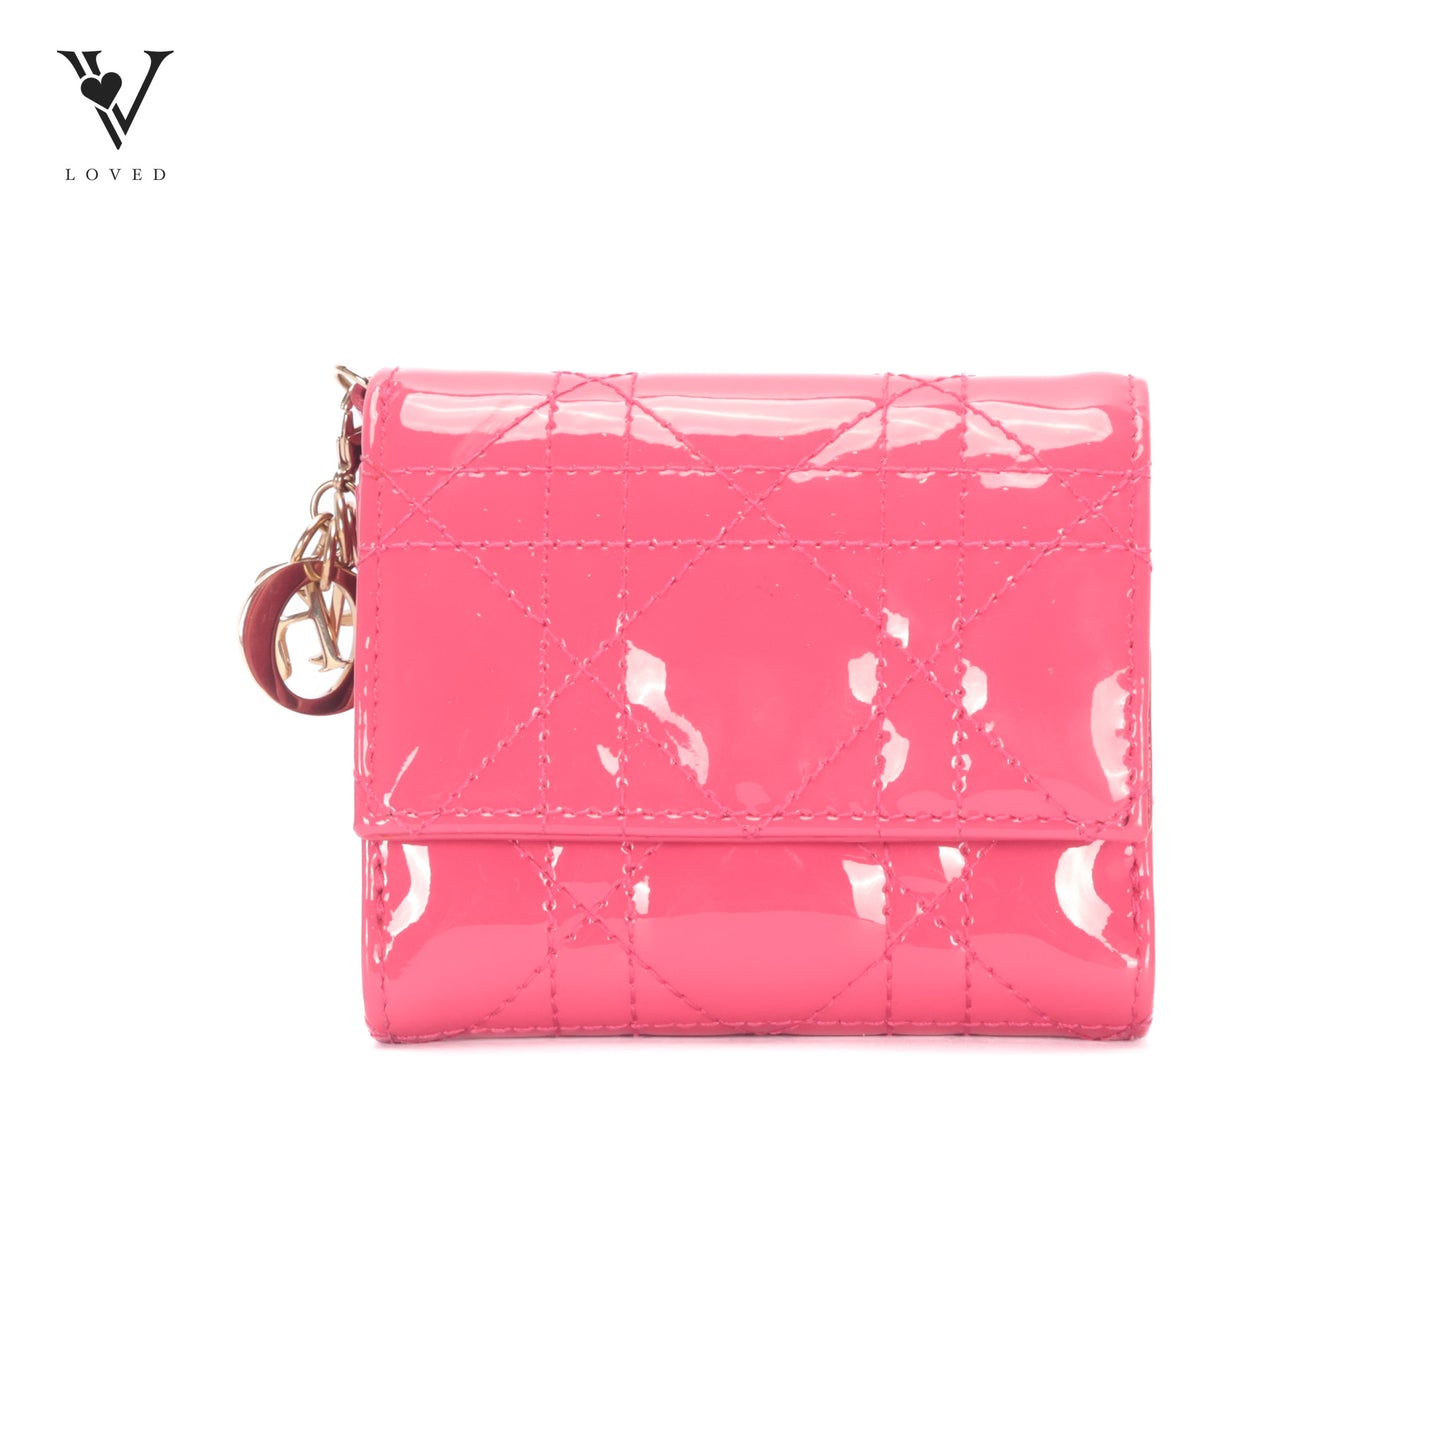 Lady Dior Lotus Wallet in Bright Pink Patent Cannage Calfskin